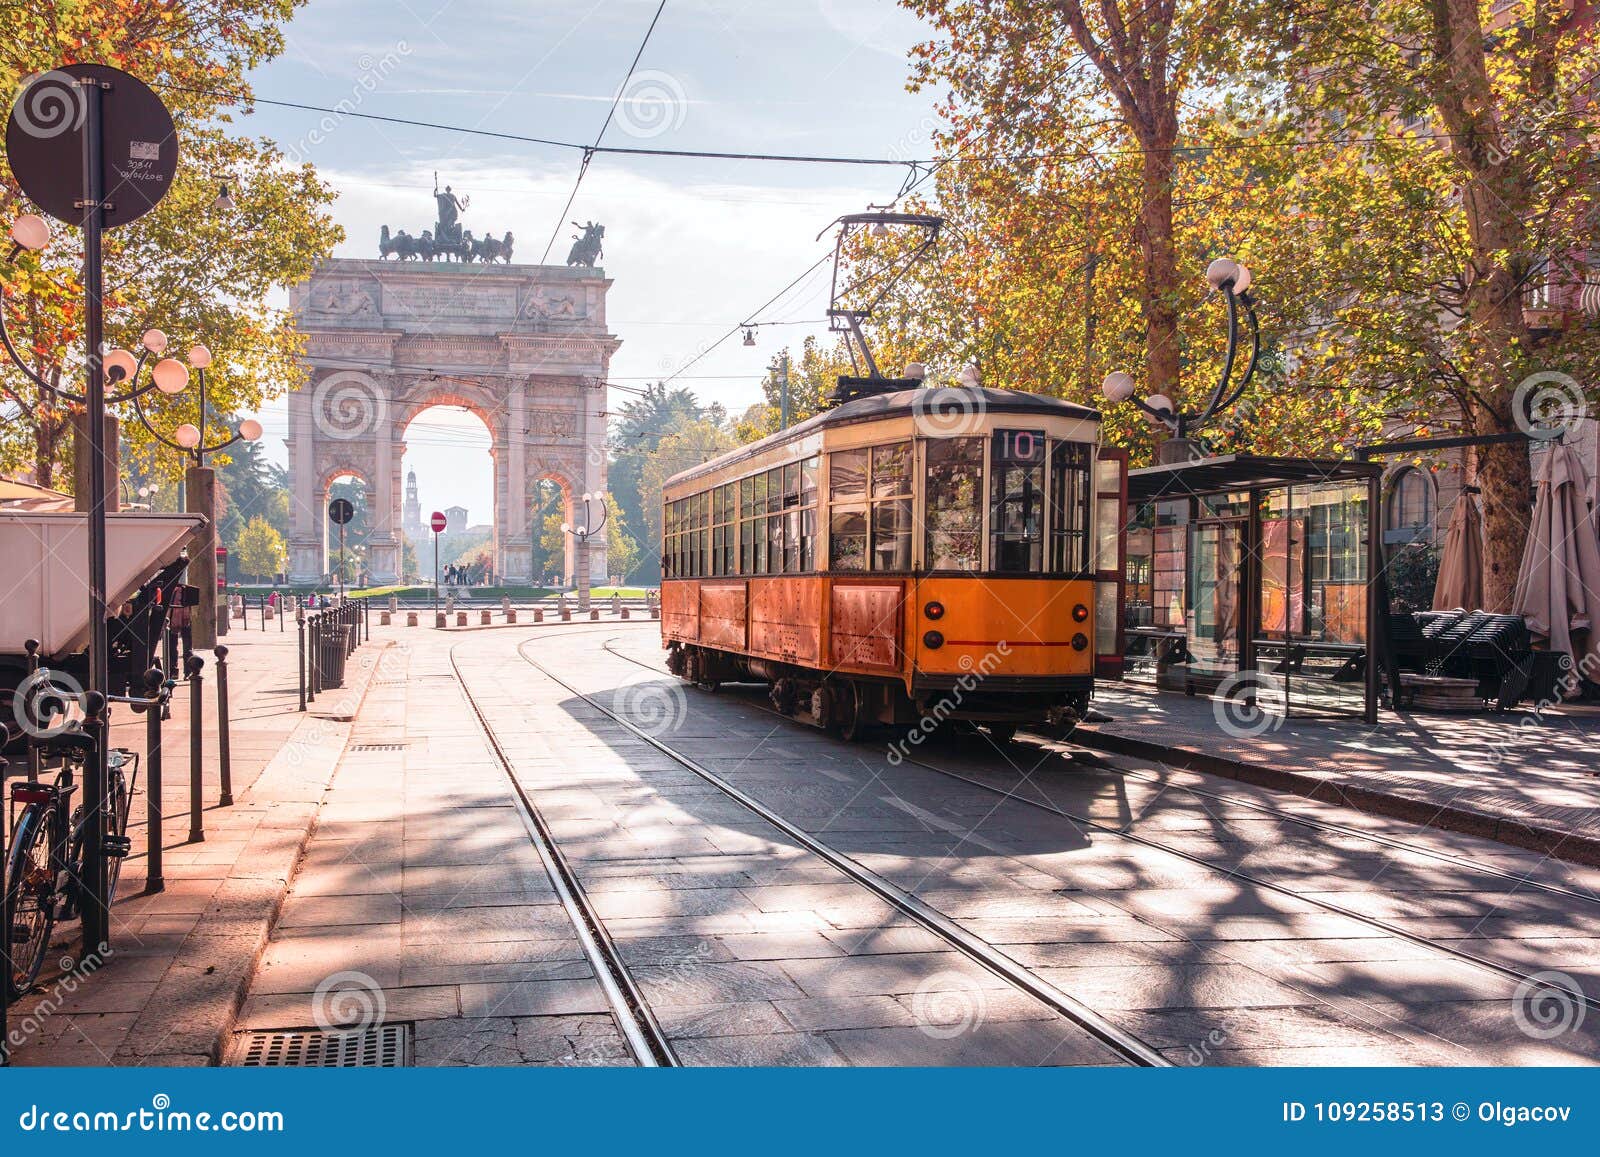 famous vintage tram in milan, lombardia, italy